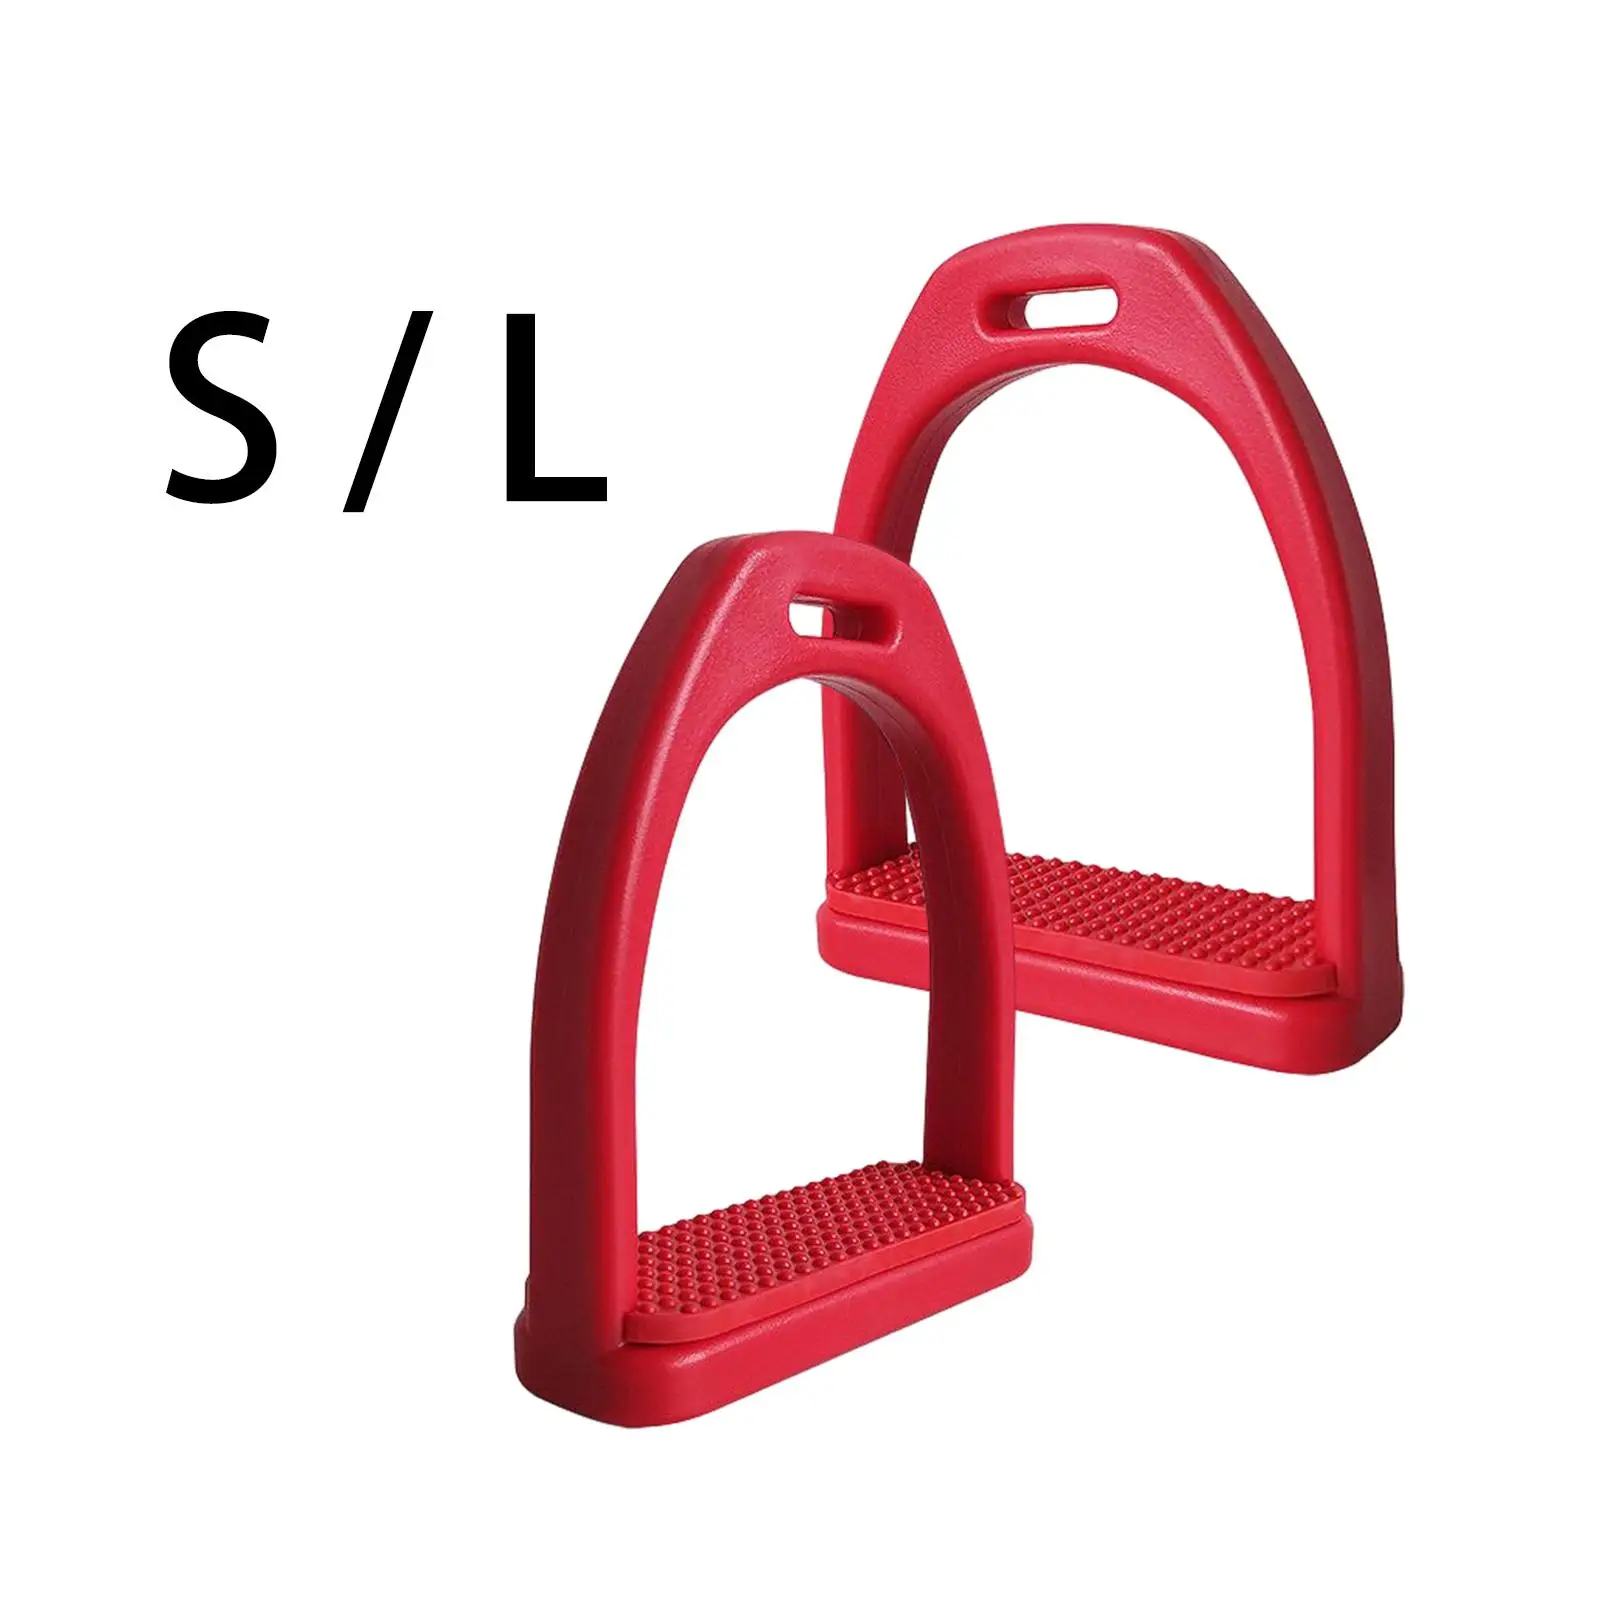 2Pcs Horse Riding Stirrups Equestrian Lightweight High Strength Tool for Safety Horse Riding Outdoor Sports Accessories Childen